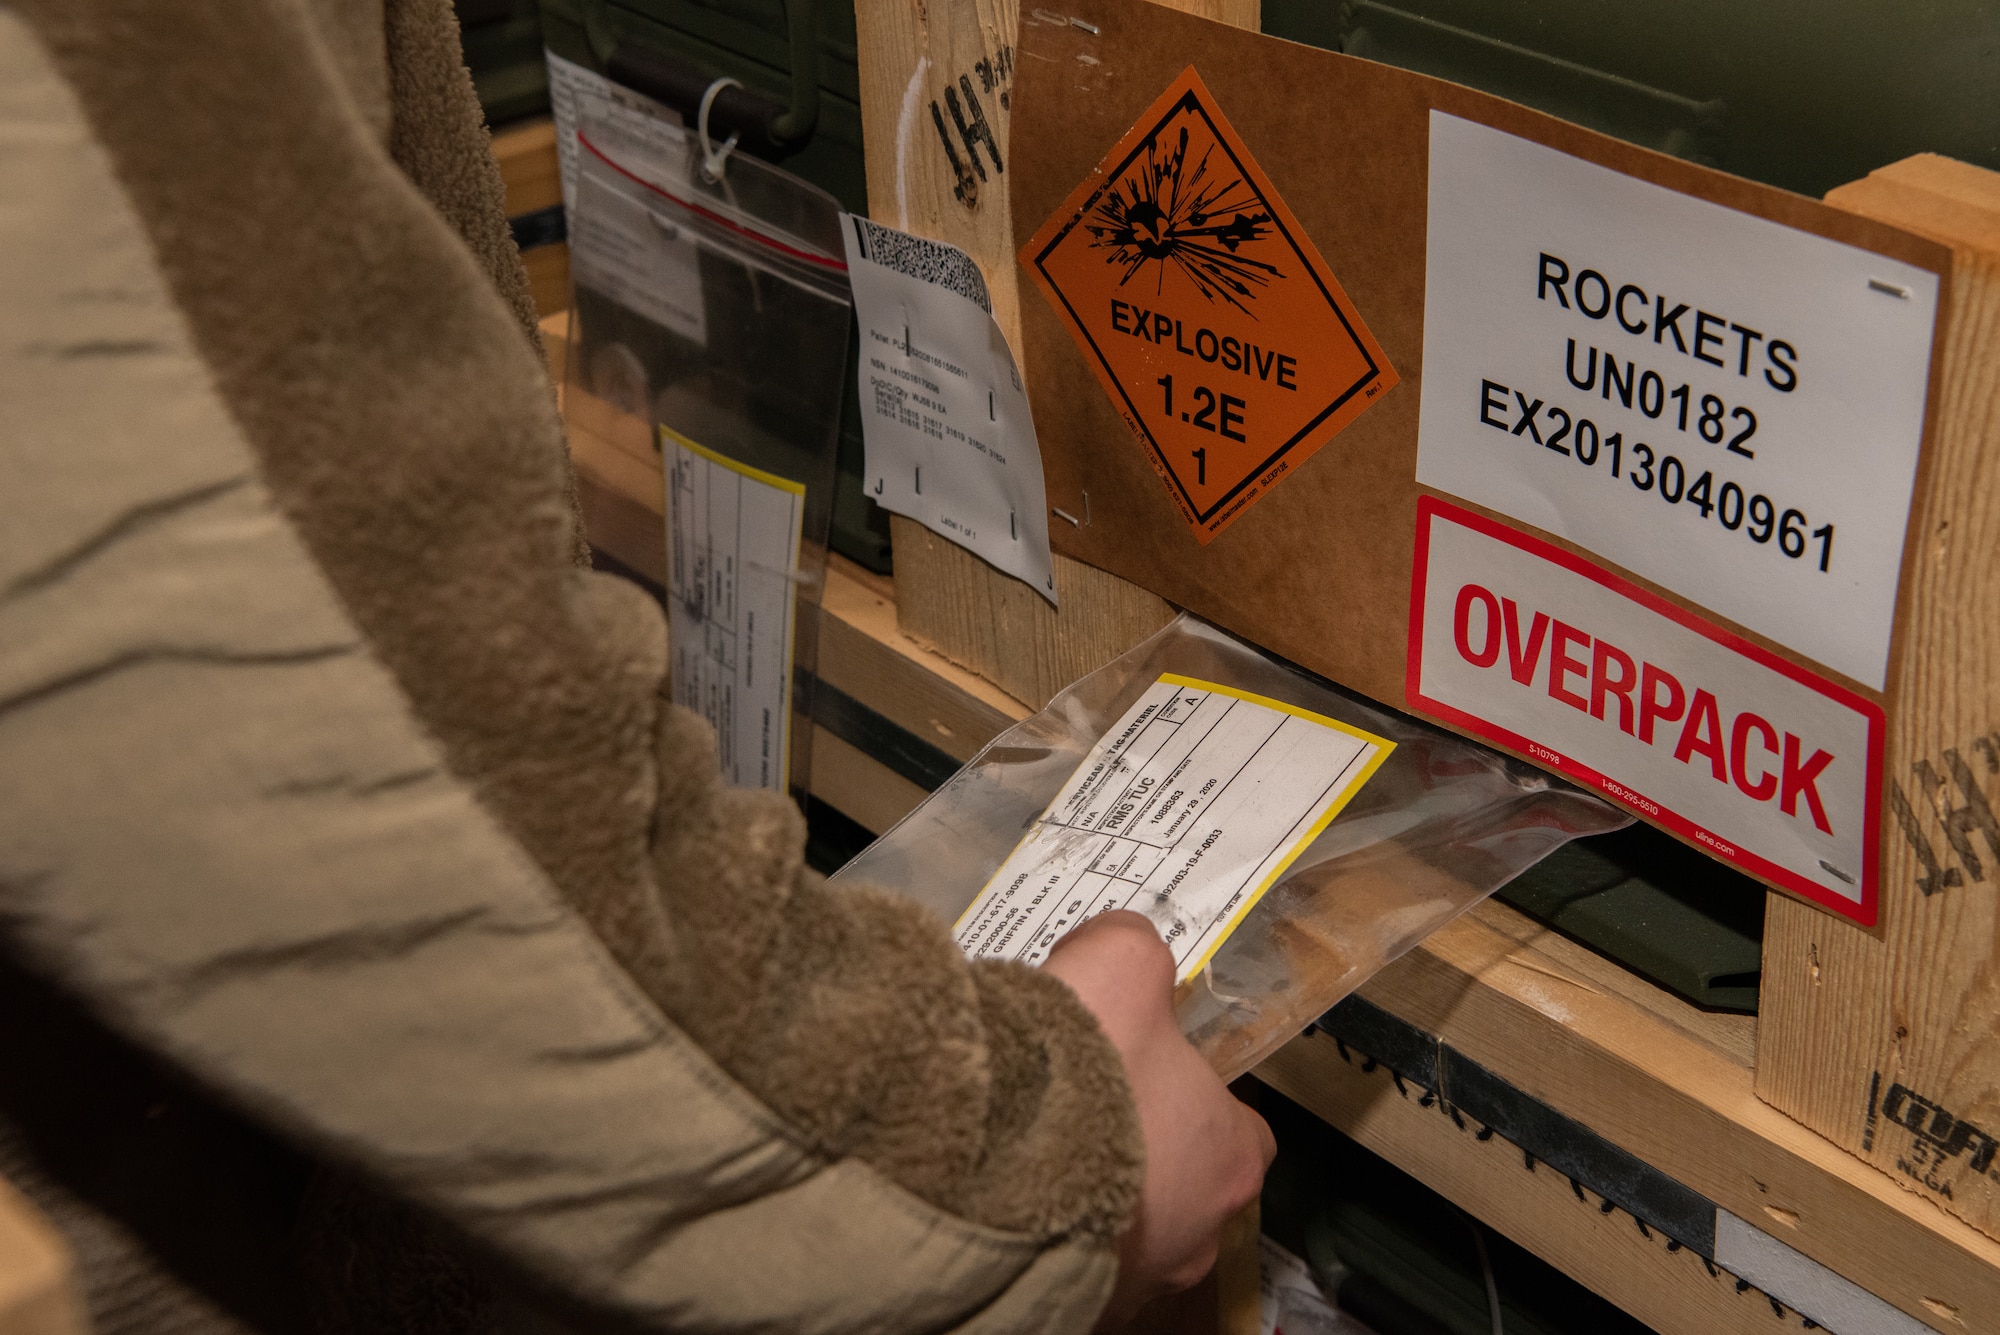 An Air Force Airman is looking at a tag attached to a container containing rockets.